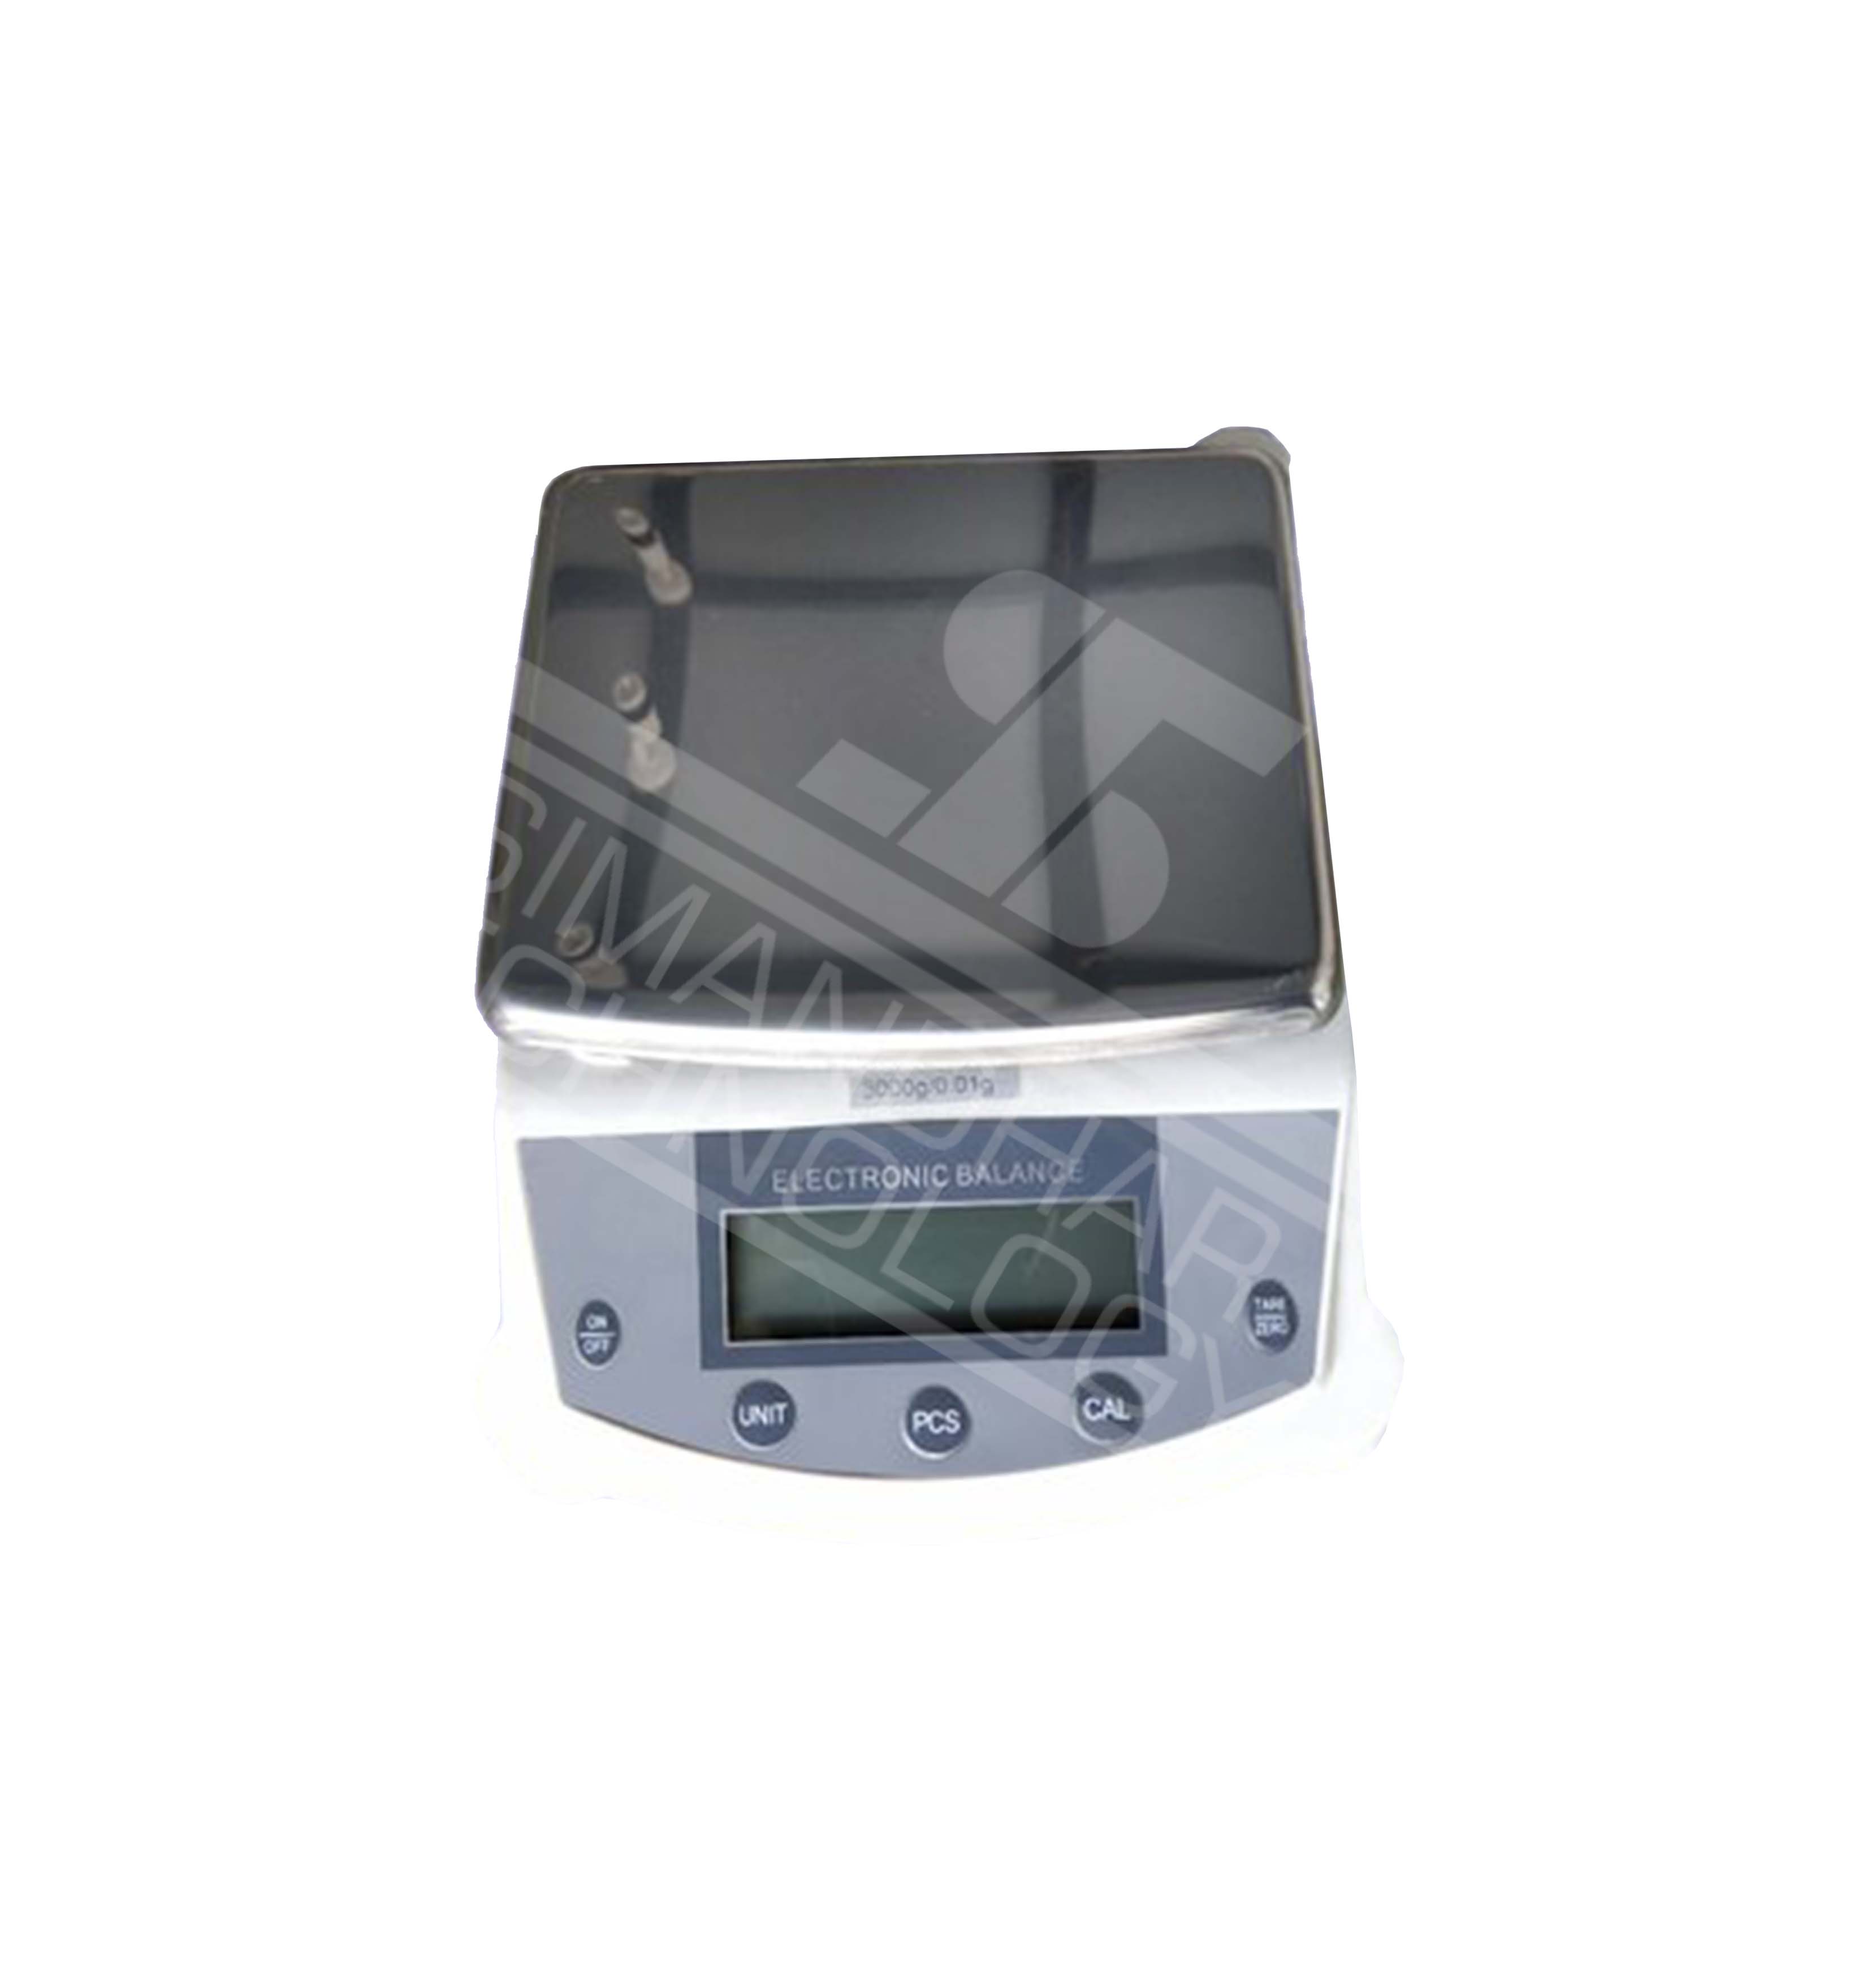 Jewellery Weighing Scale Manufacturer in India